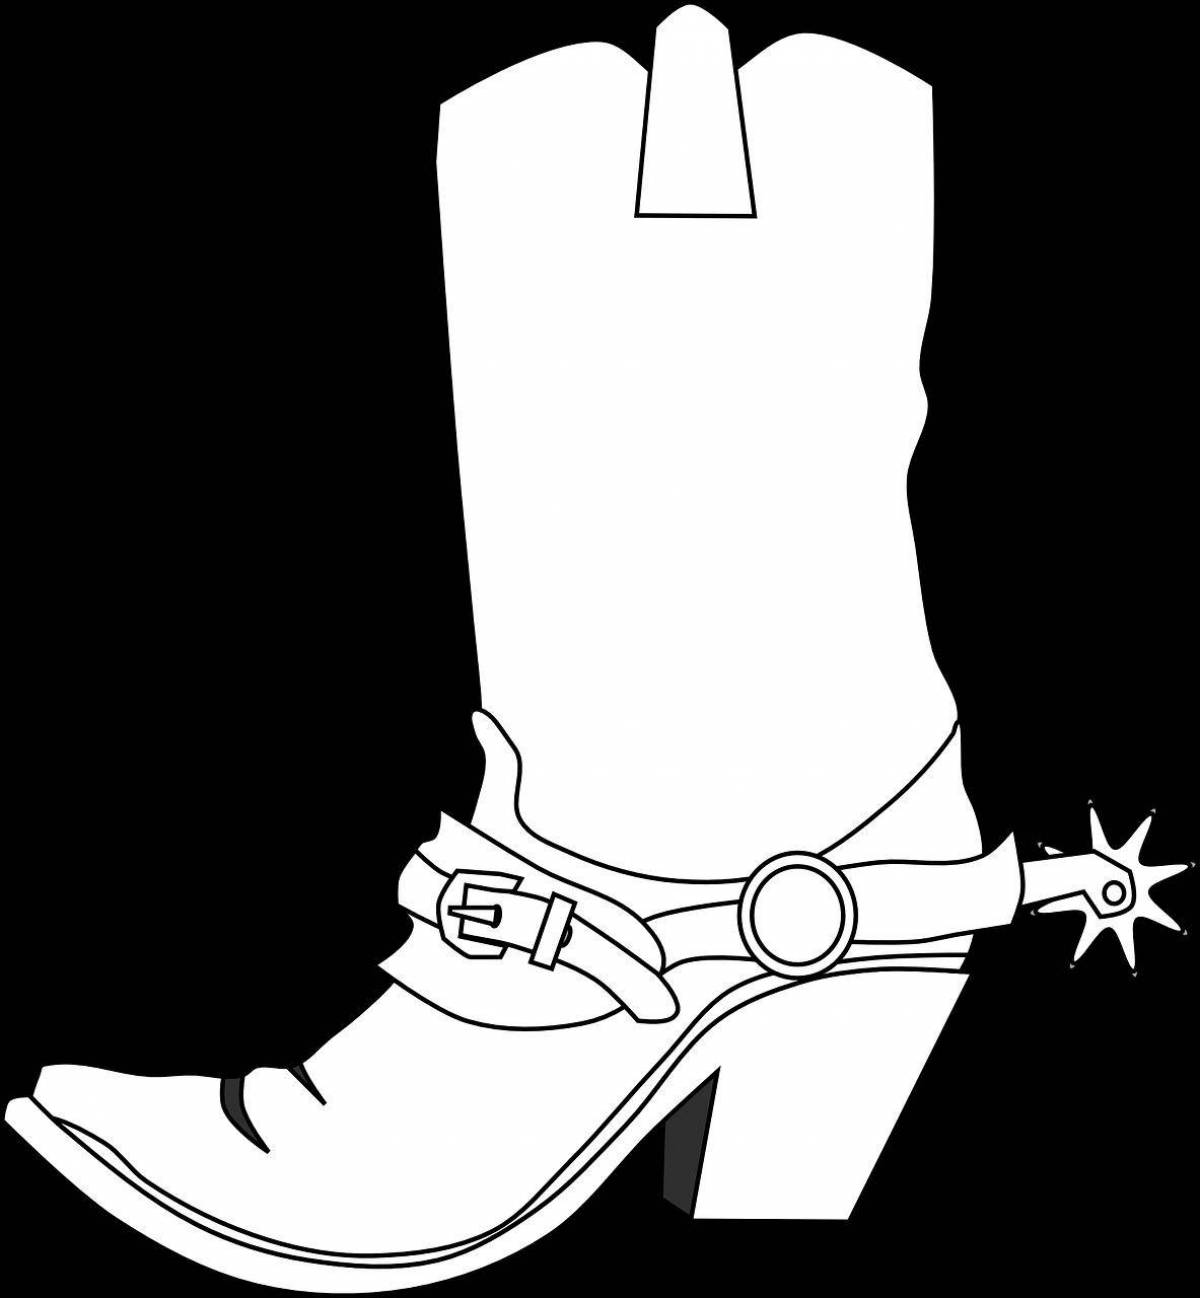 Playful walking boots coloring page